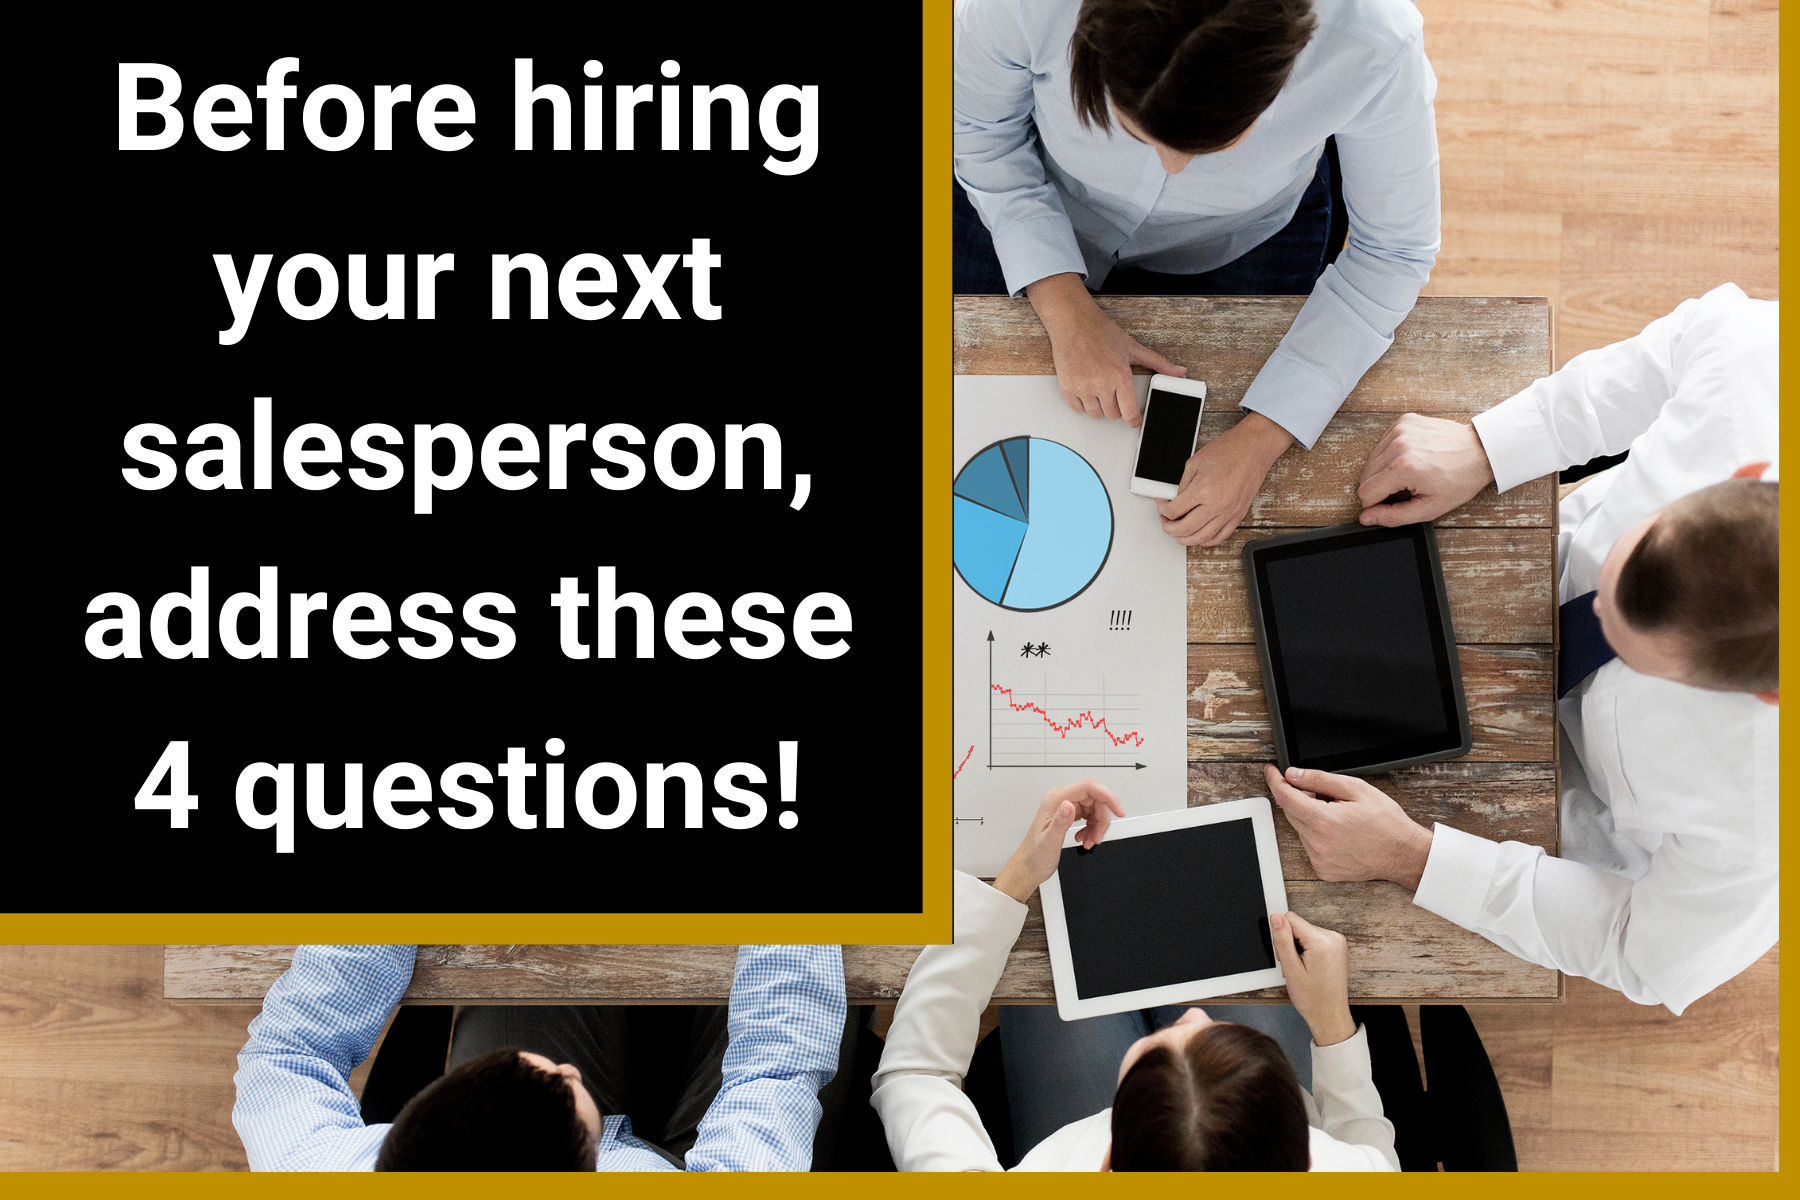 Before hiring your next salesperson, address these 4 questions!